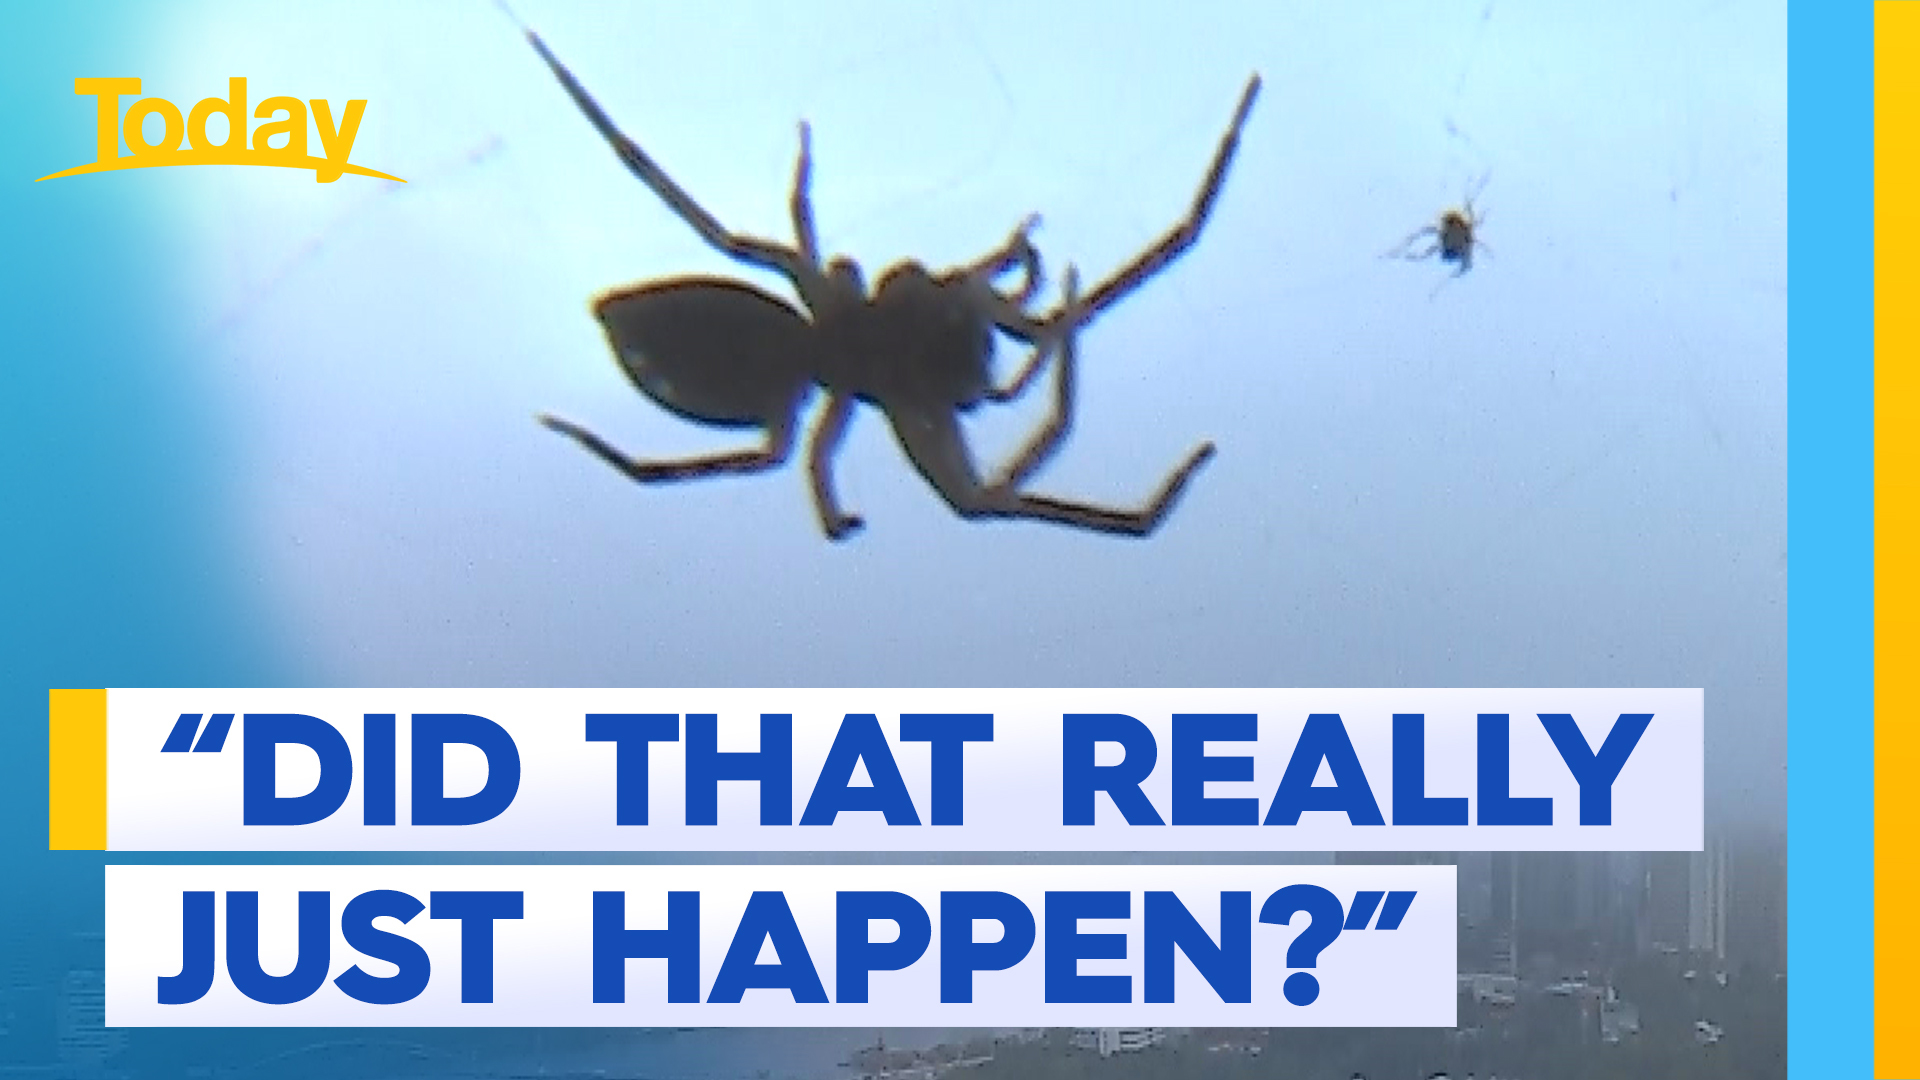 Spider startles Today hosts with surprise appearance during weather read